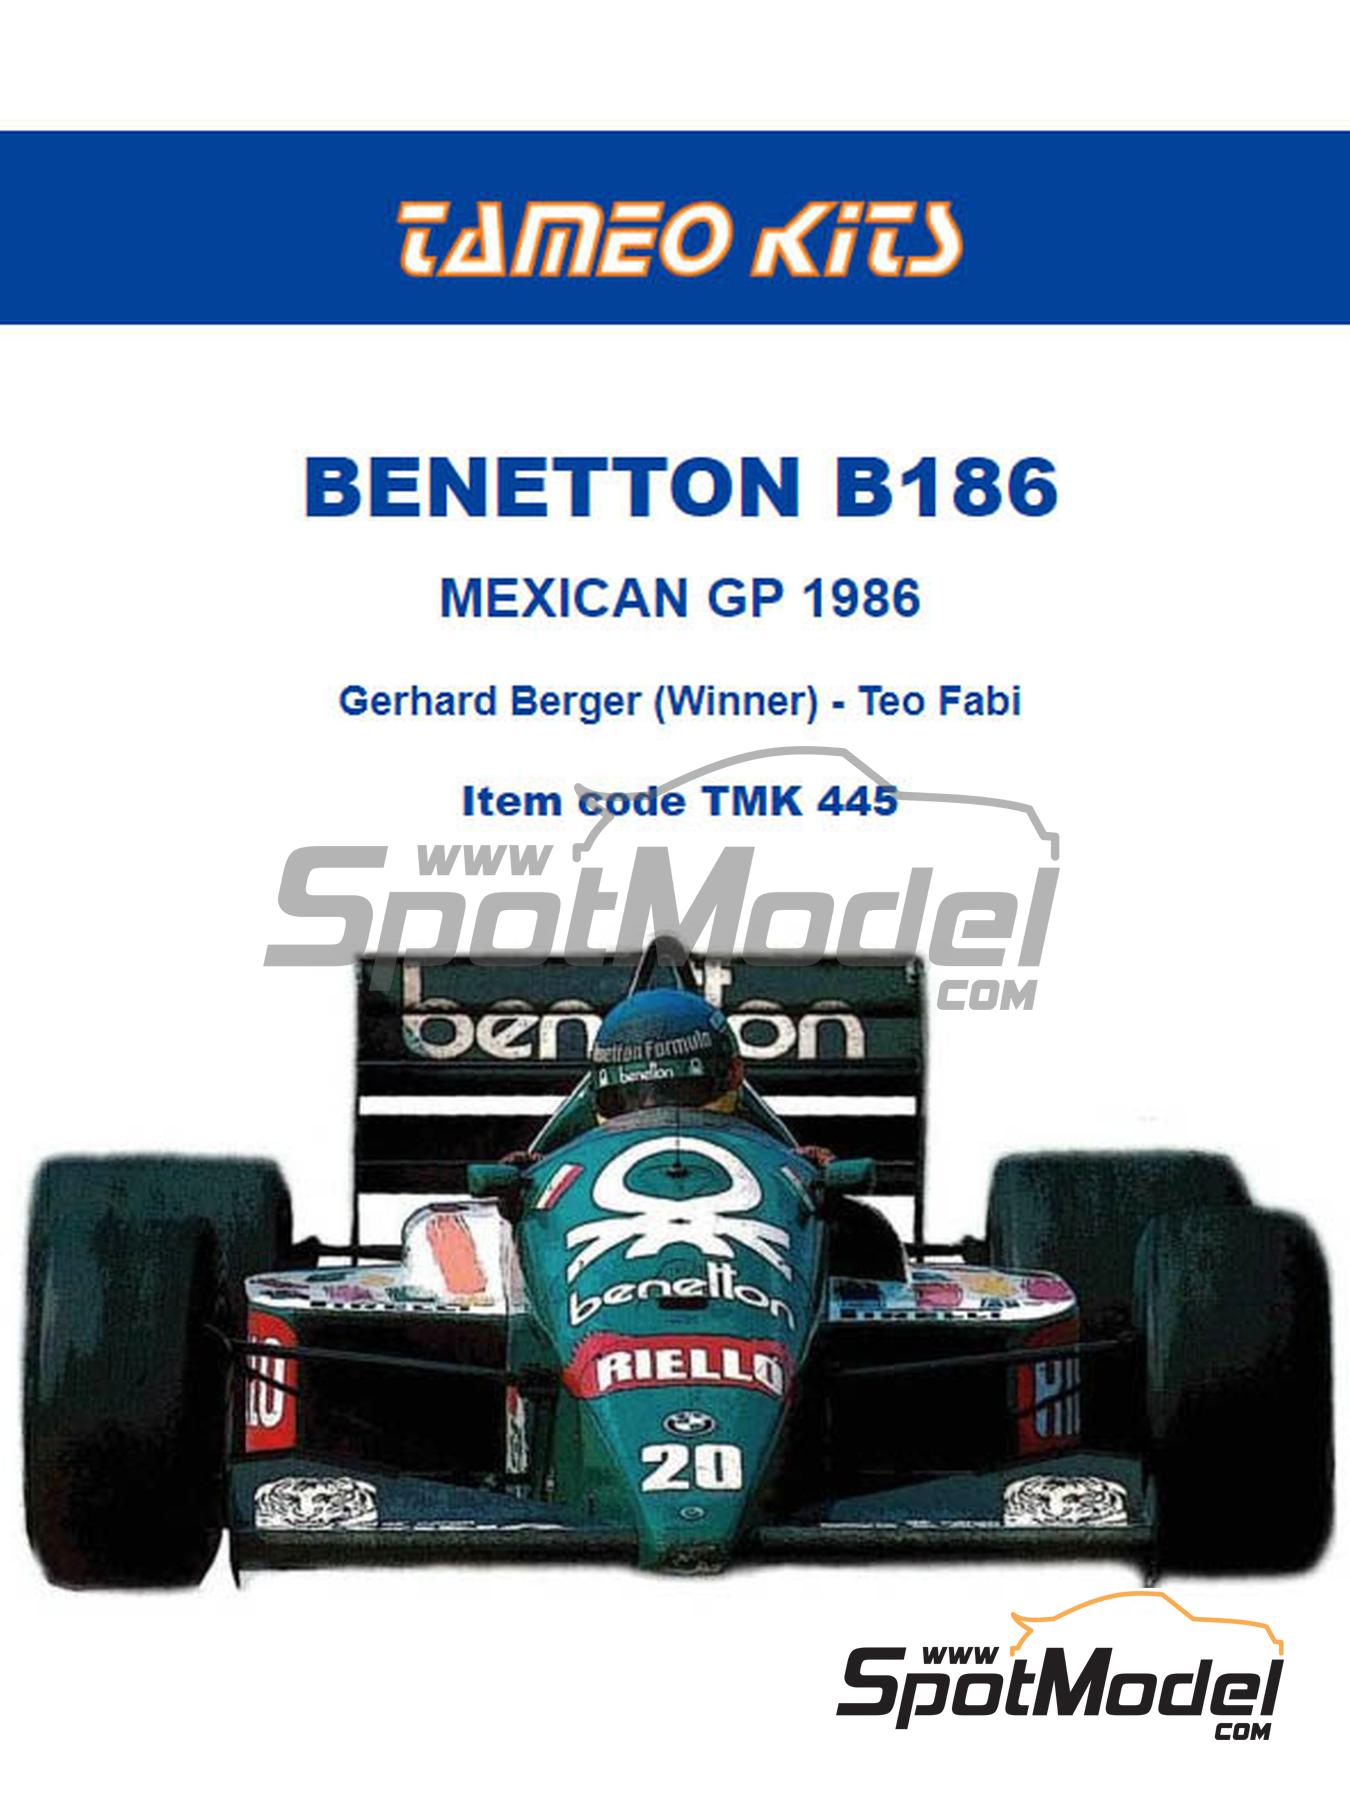 Benetton BMW B186 sponsored by Benetton, Riello - Mexican Formula 1 Grand  Prix 1986. Car scale model kit in 1/43 scale manufactured by Tameo Kits (ref